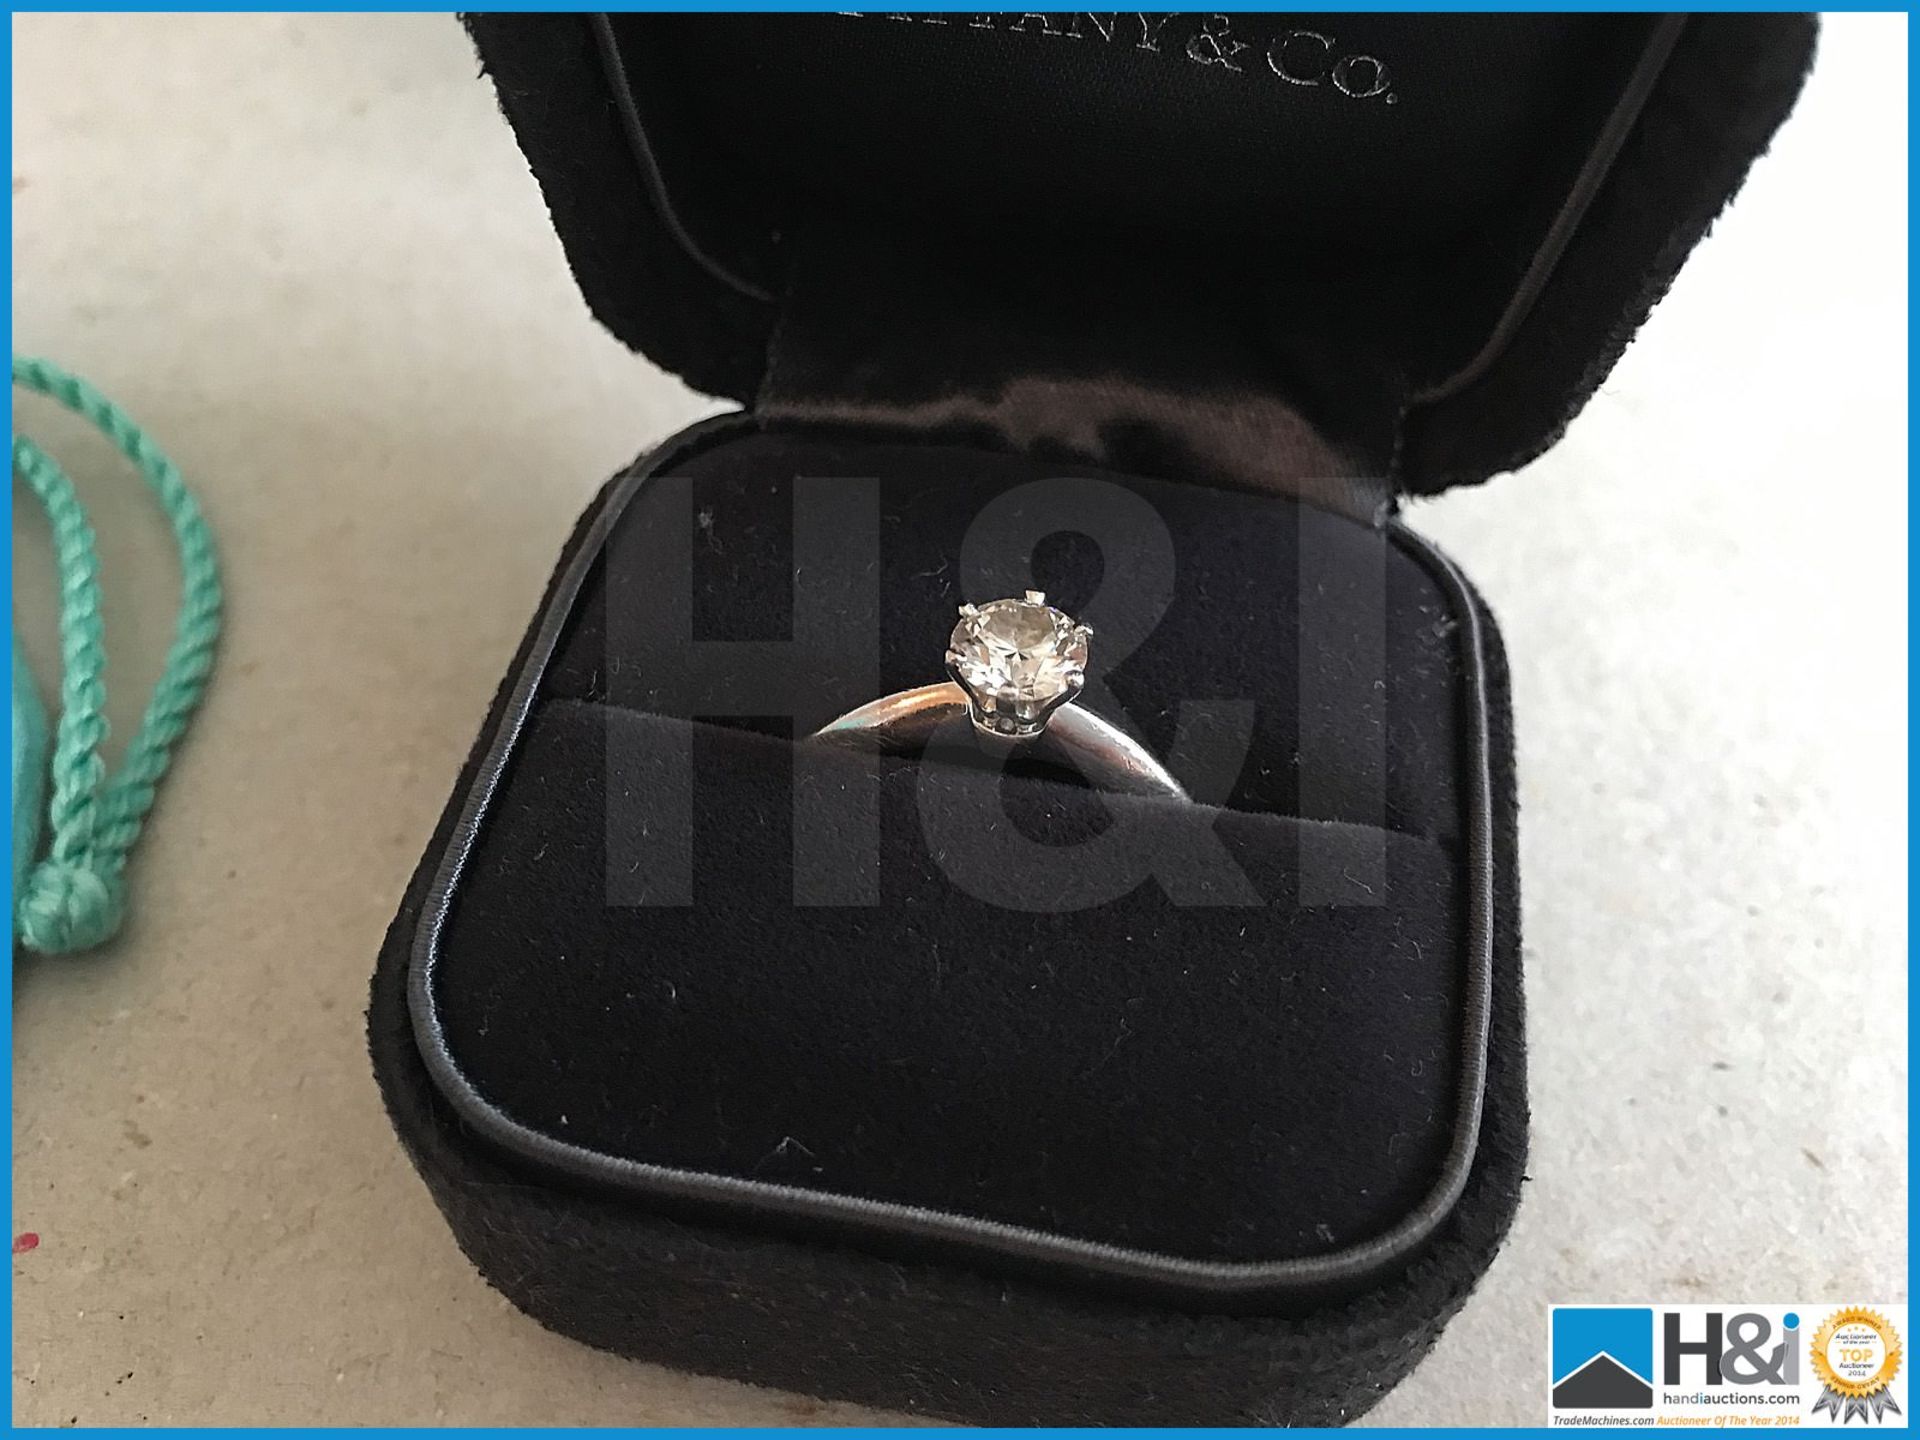 Genuine Tiffany classic iconic engagement ring in Platinum with 0.75 Carat Diamond purchased from Ti - Image 5 of 8